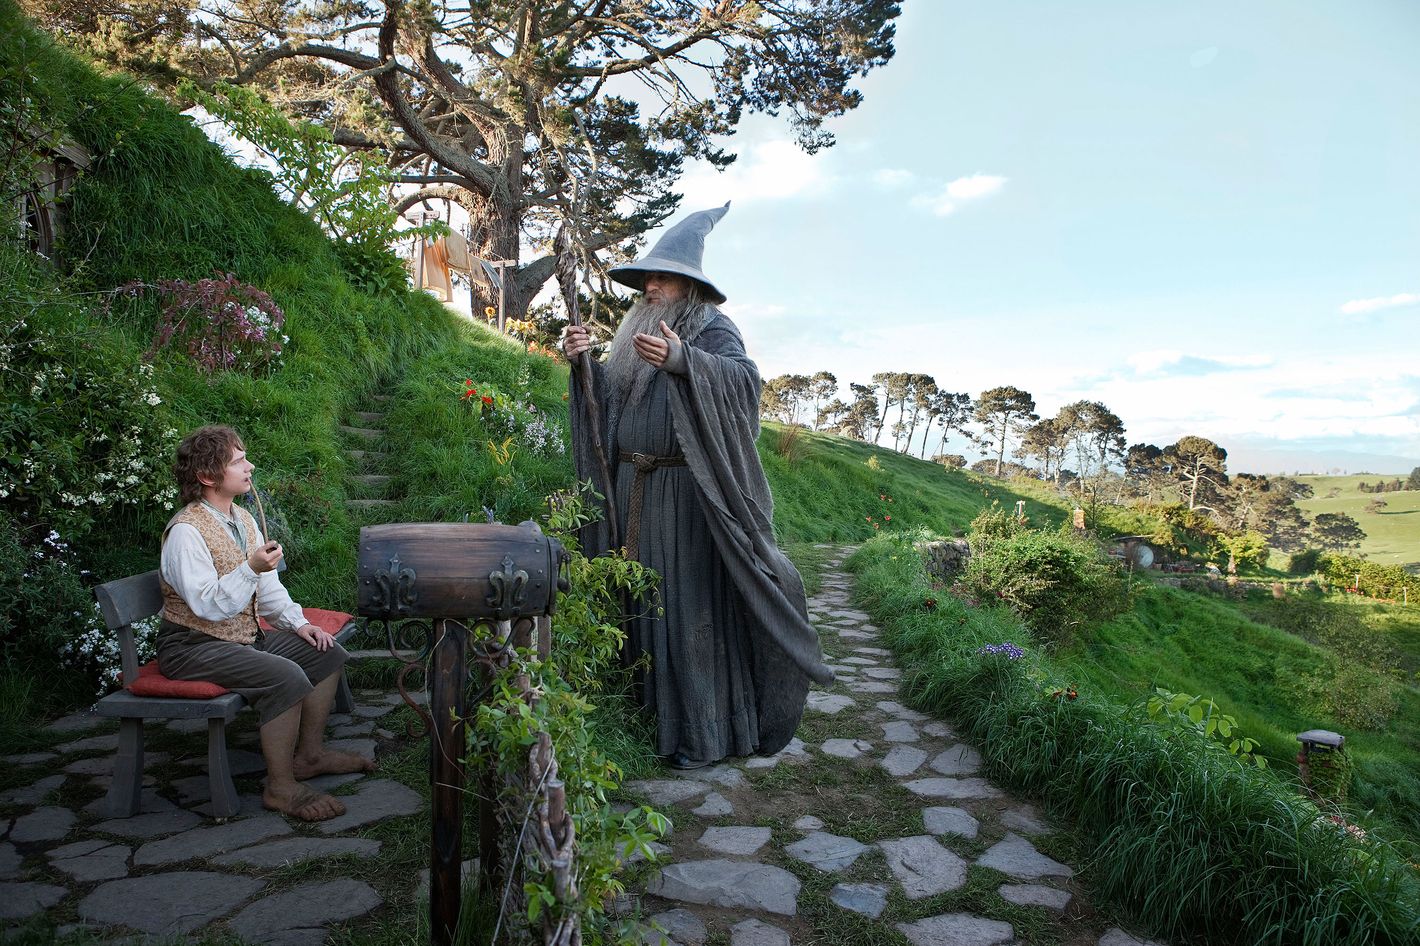 A trio of Middle-earth returnees reflect on 'The Hobbit